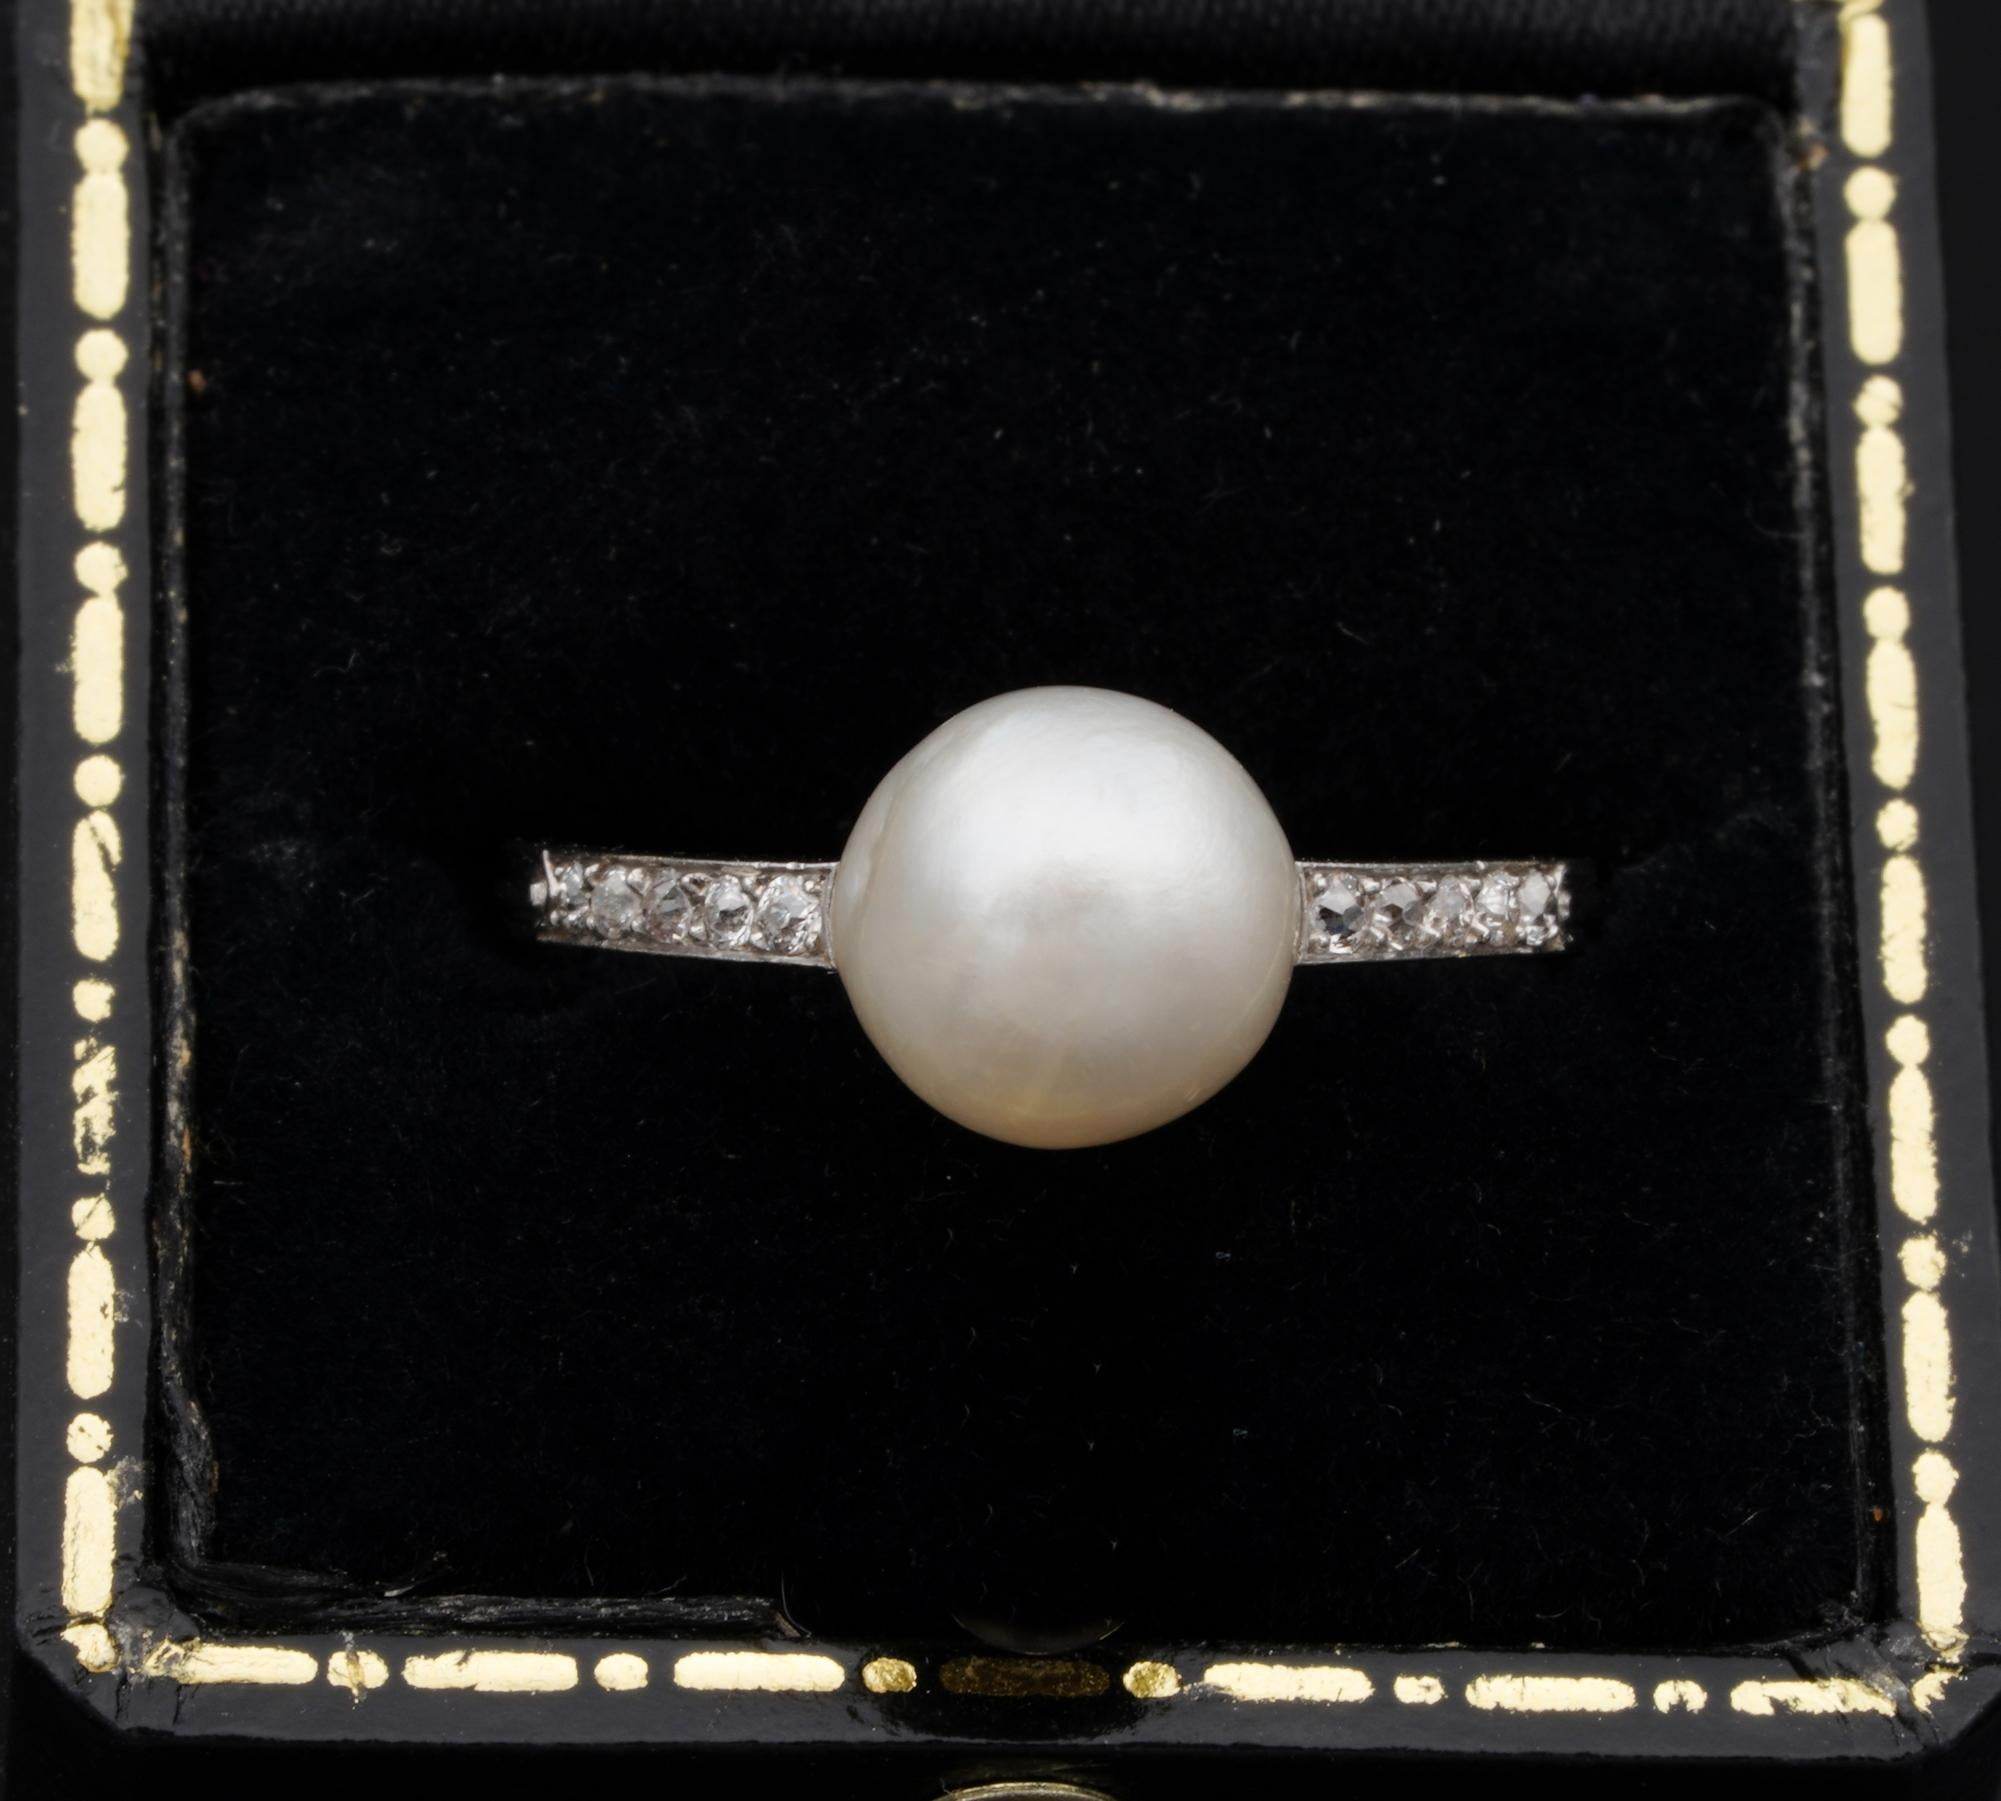 Made By Nature

Beautiful antique French ring set with rare natural – not nucleated sea pearl
Art Deco period, bears French mark for Platinum
Timeless, elegant design as solitaire set for the rare Pearl flanked by old mine cut Diamonds in a simple